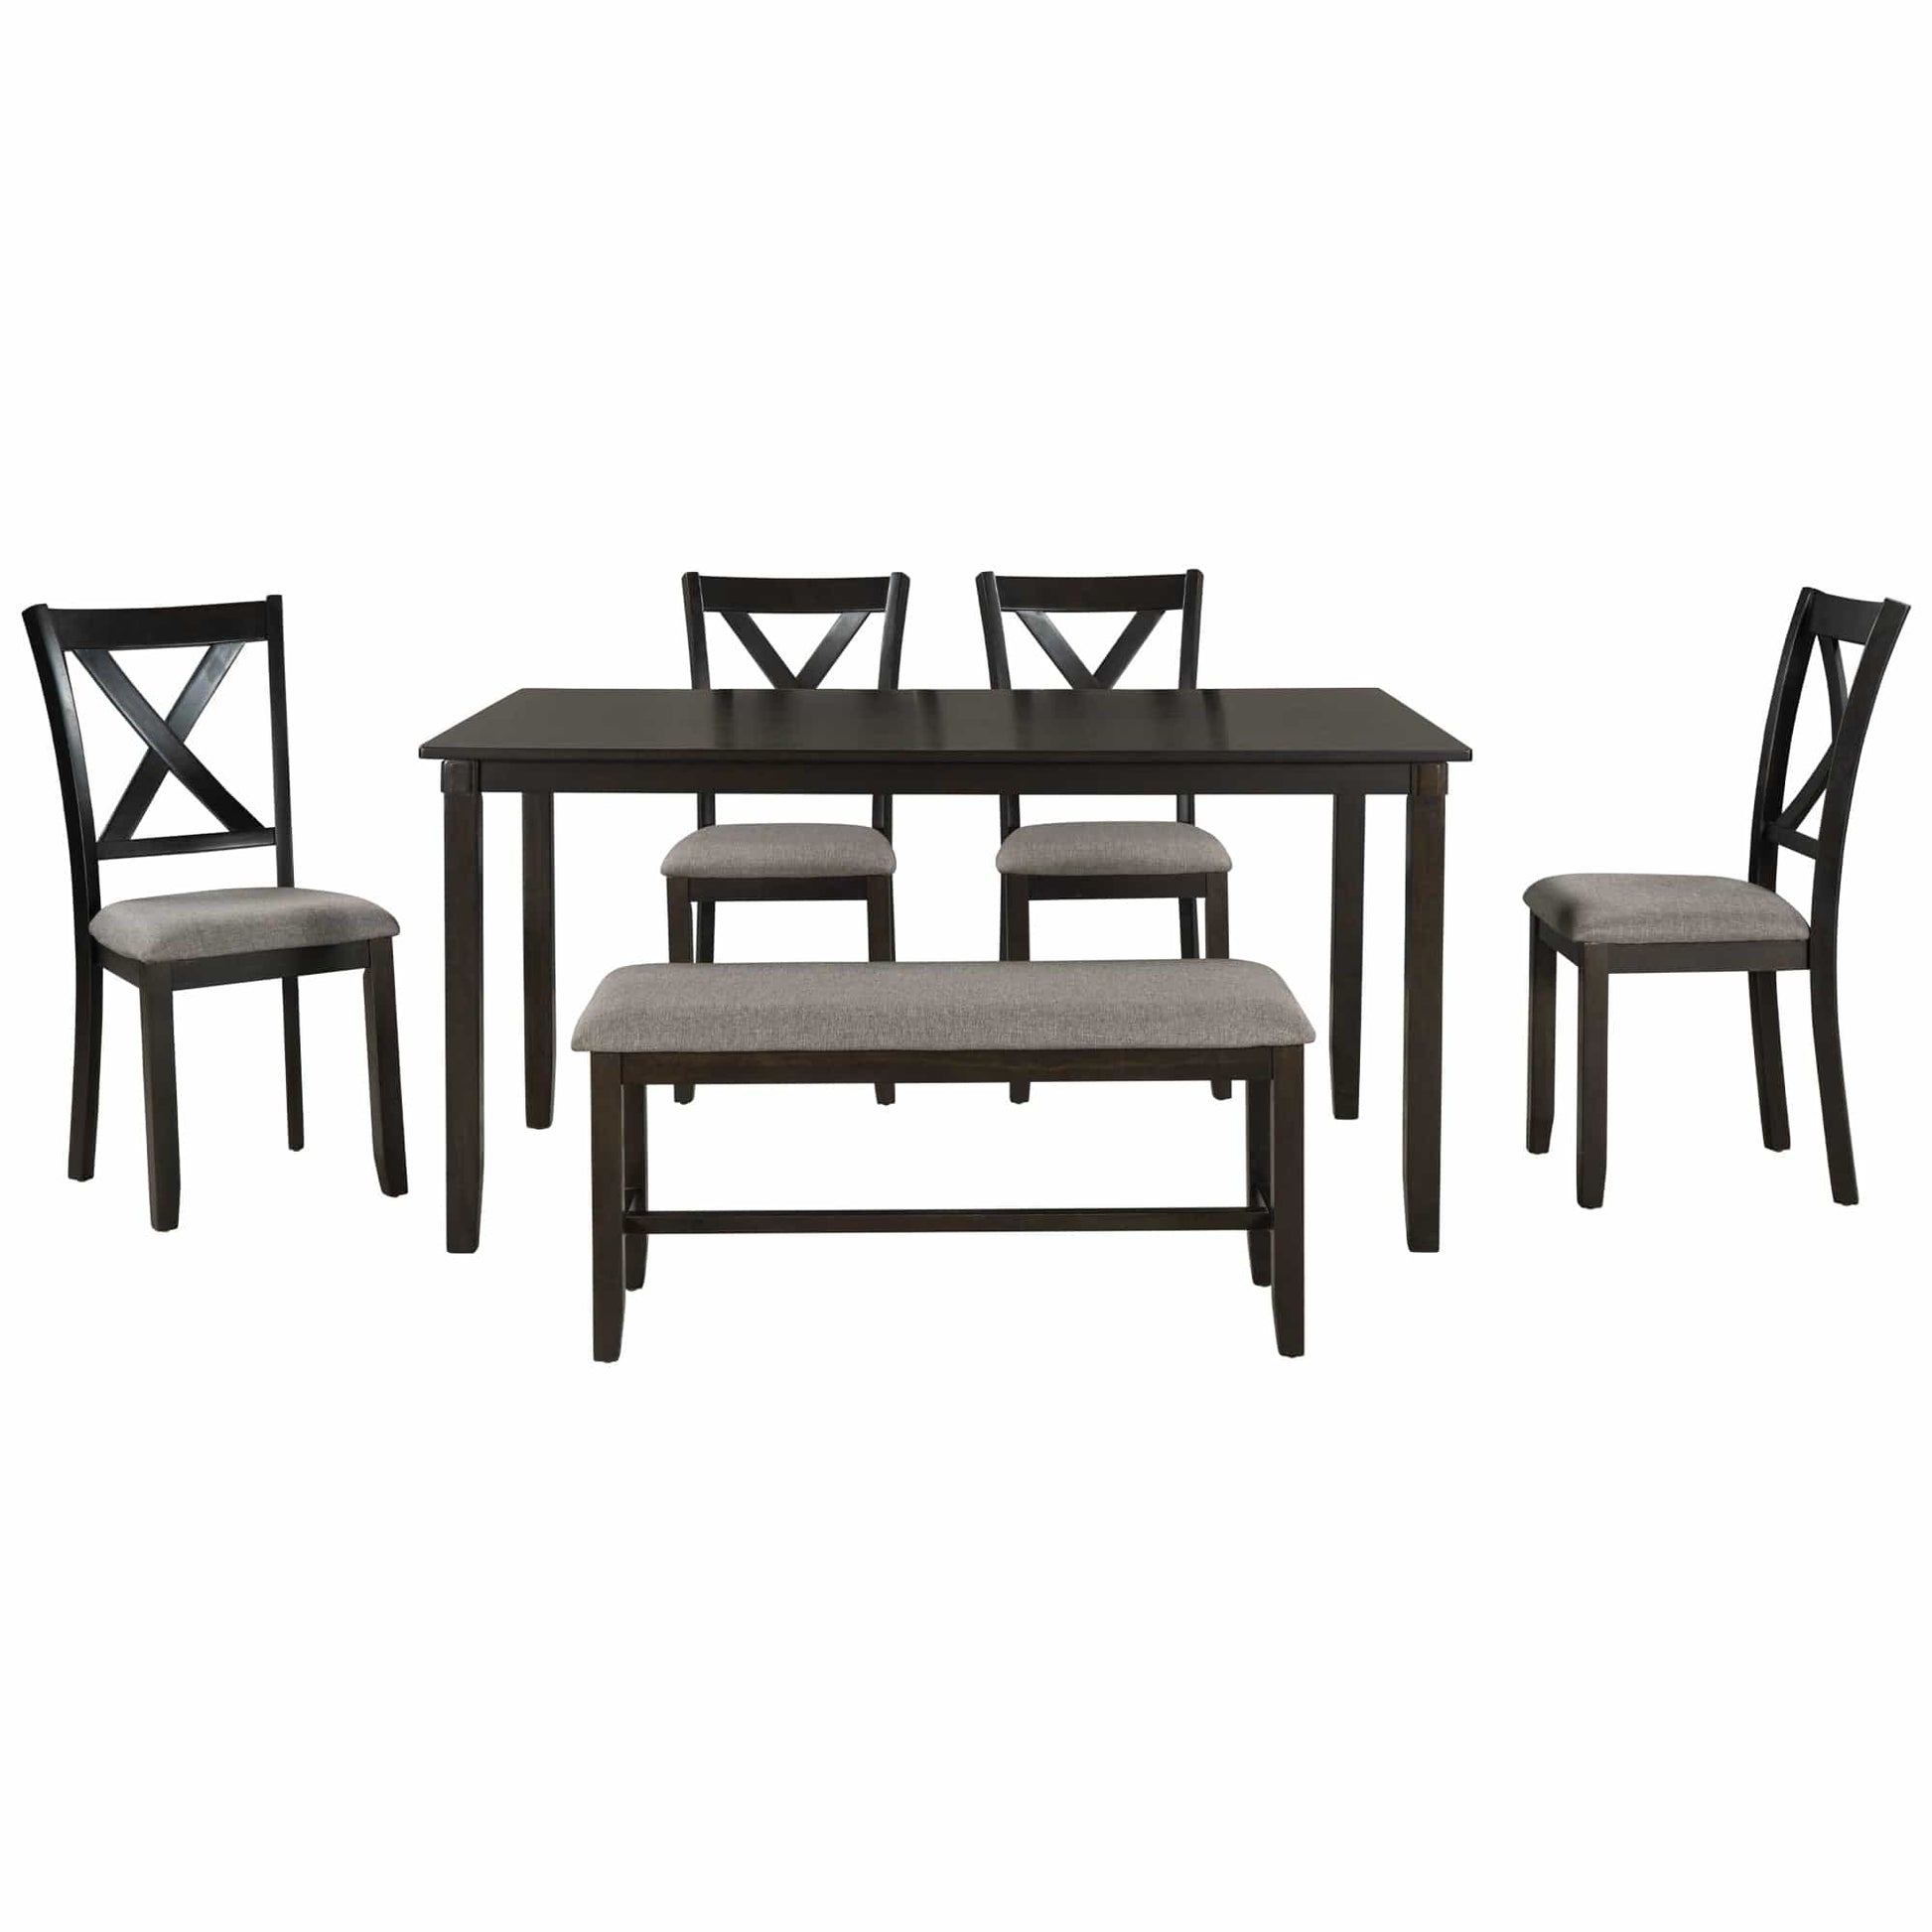 1st Choice Furniture Direct 1st Choice 6pc Kitchen Dining Table Wooden Rectangular Set in Espresso